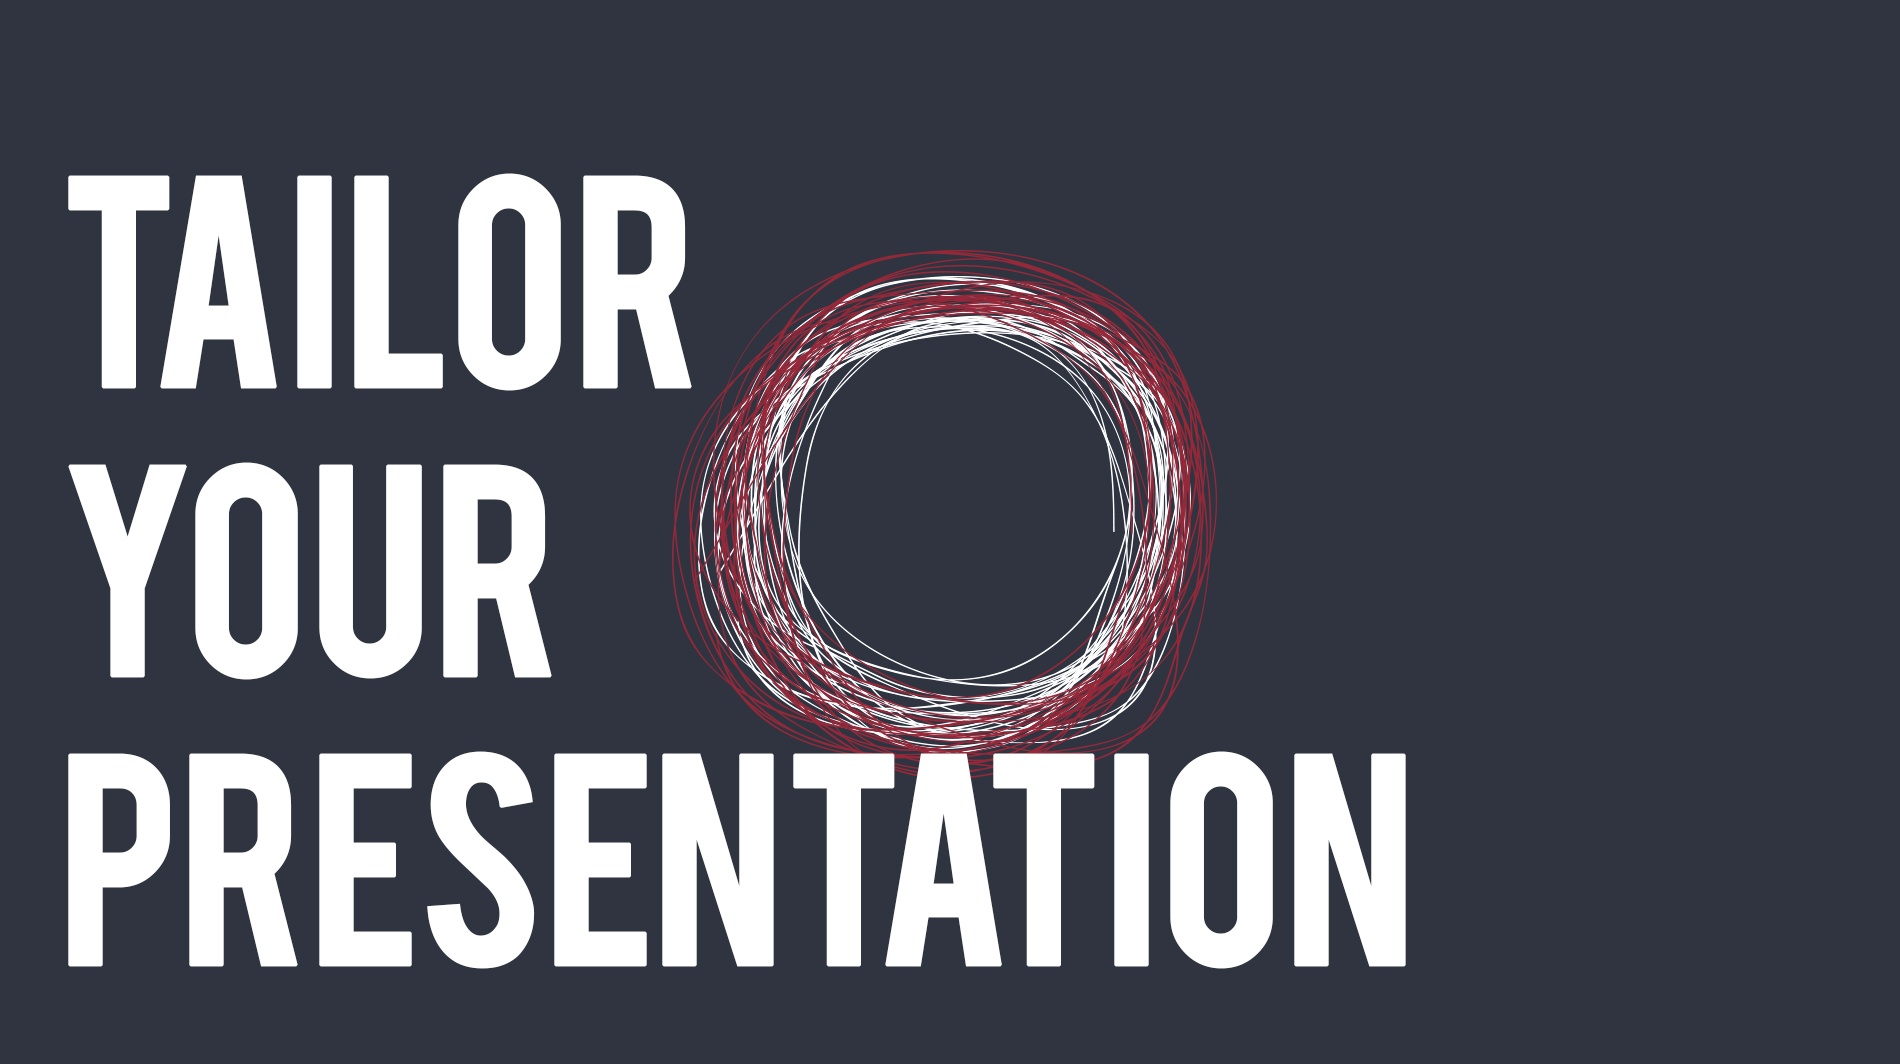 tailor your presentation meaning